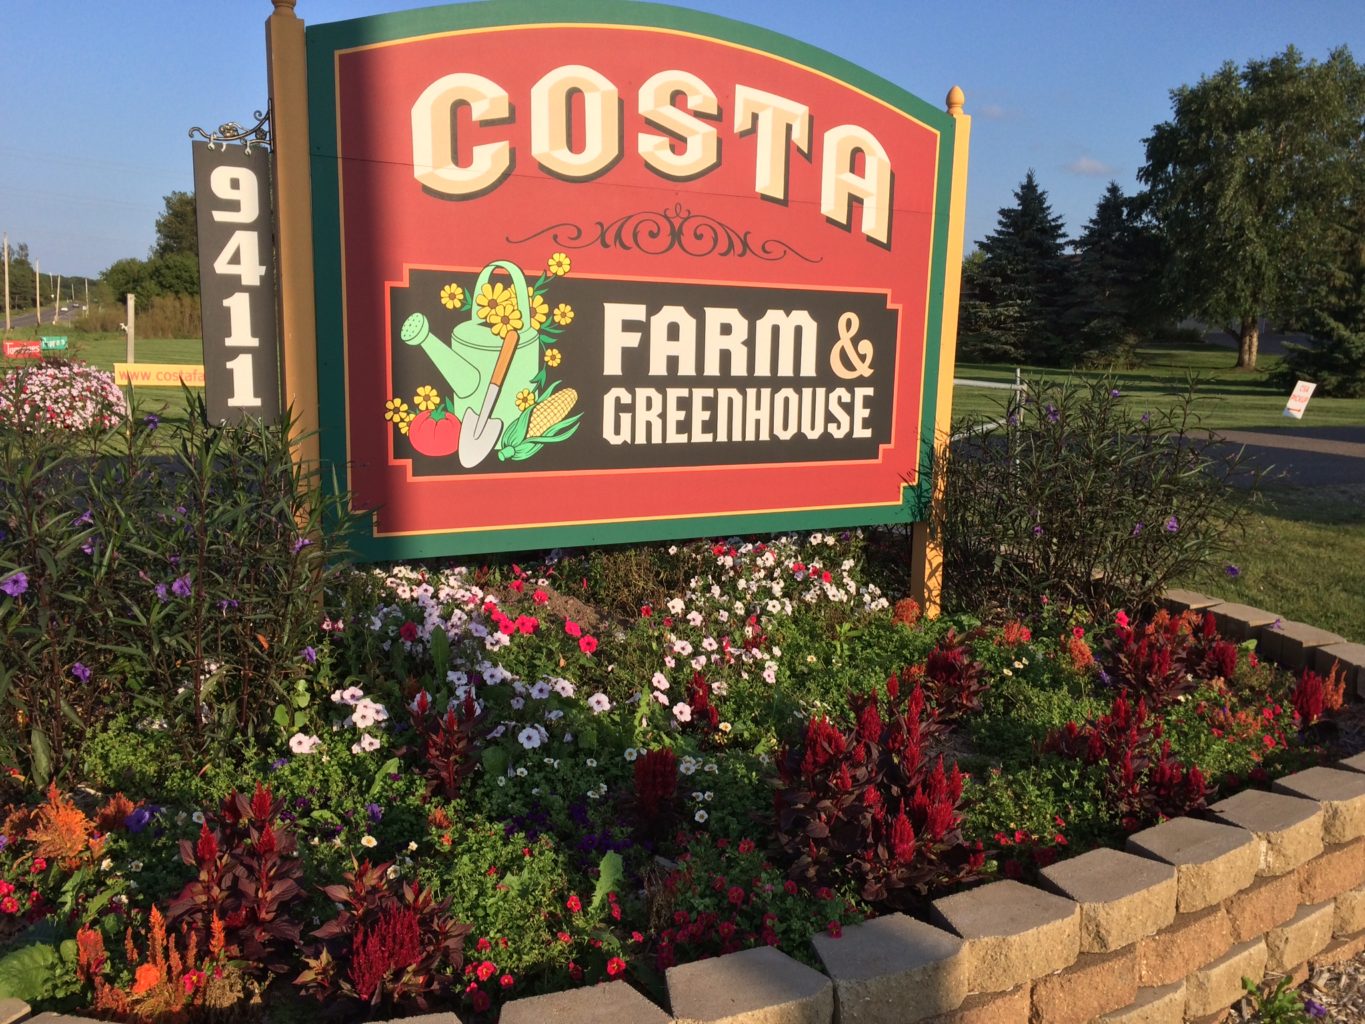 Costa farm and greenhouse outdoor sign in a flower bed. Sign design includes a red background, gold lettering, and a corn cob and tomatoe